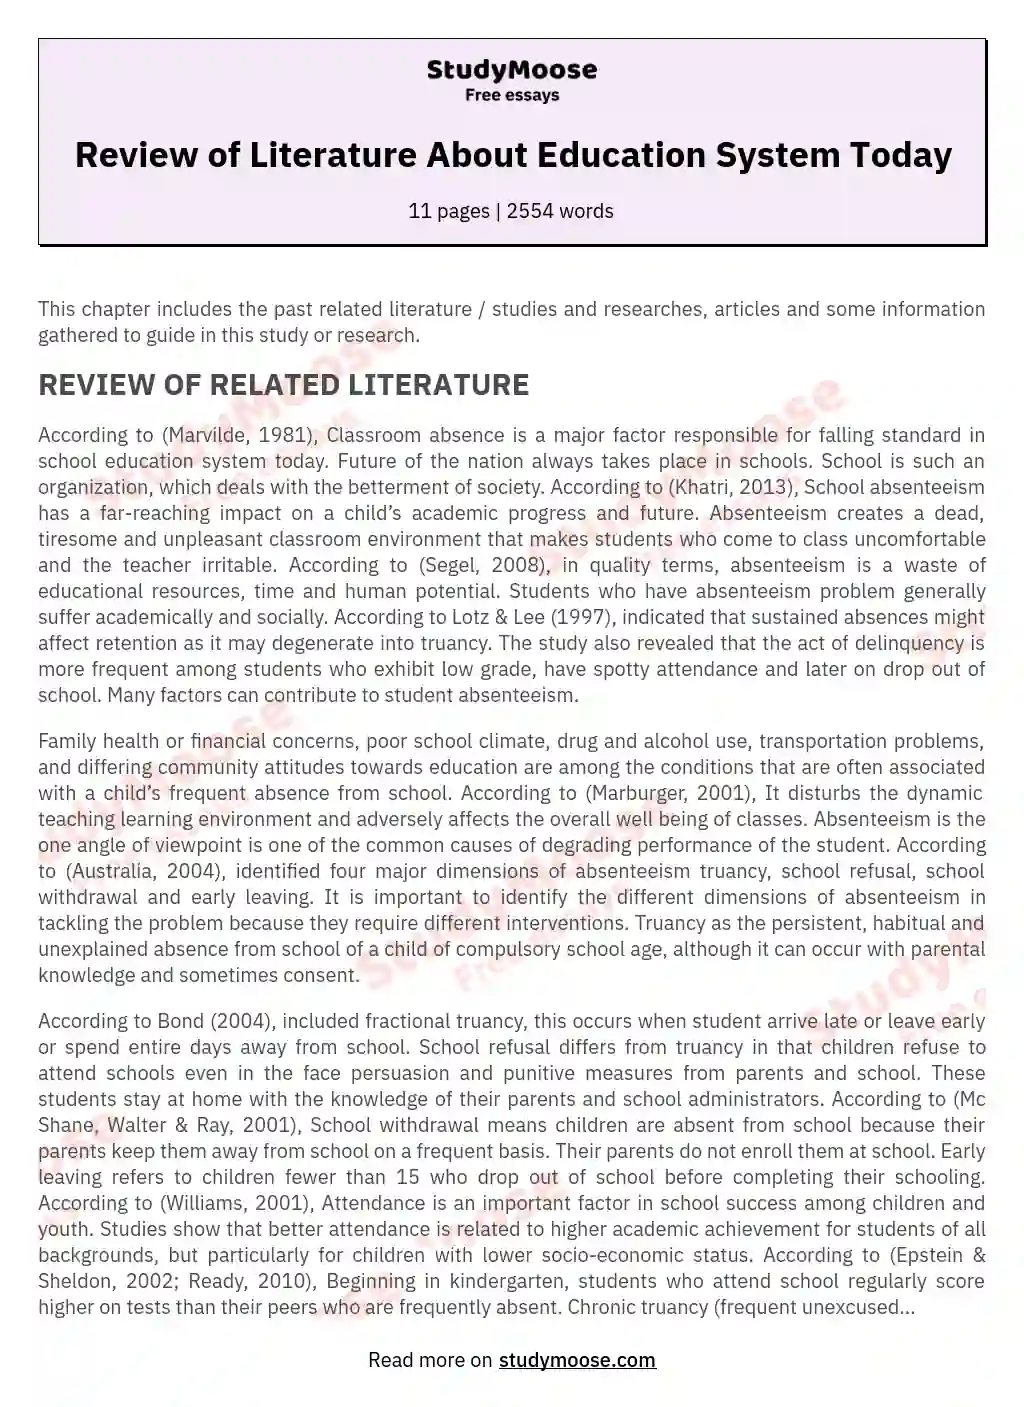 Review of Literature About Education System Today essay